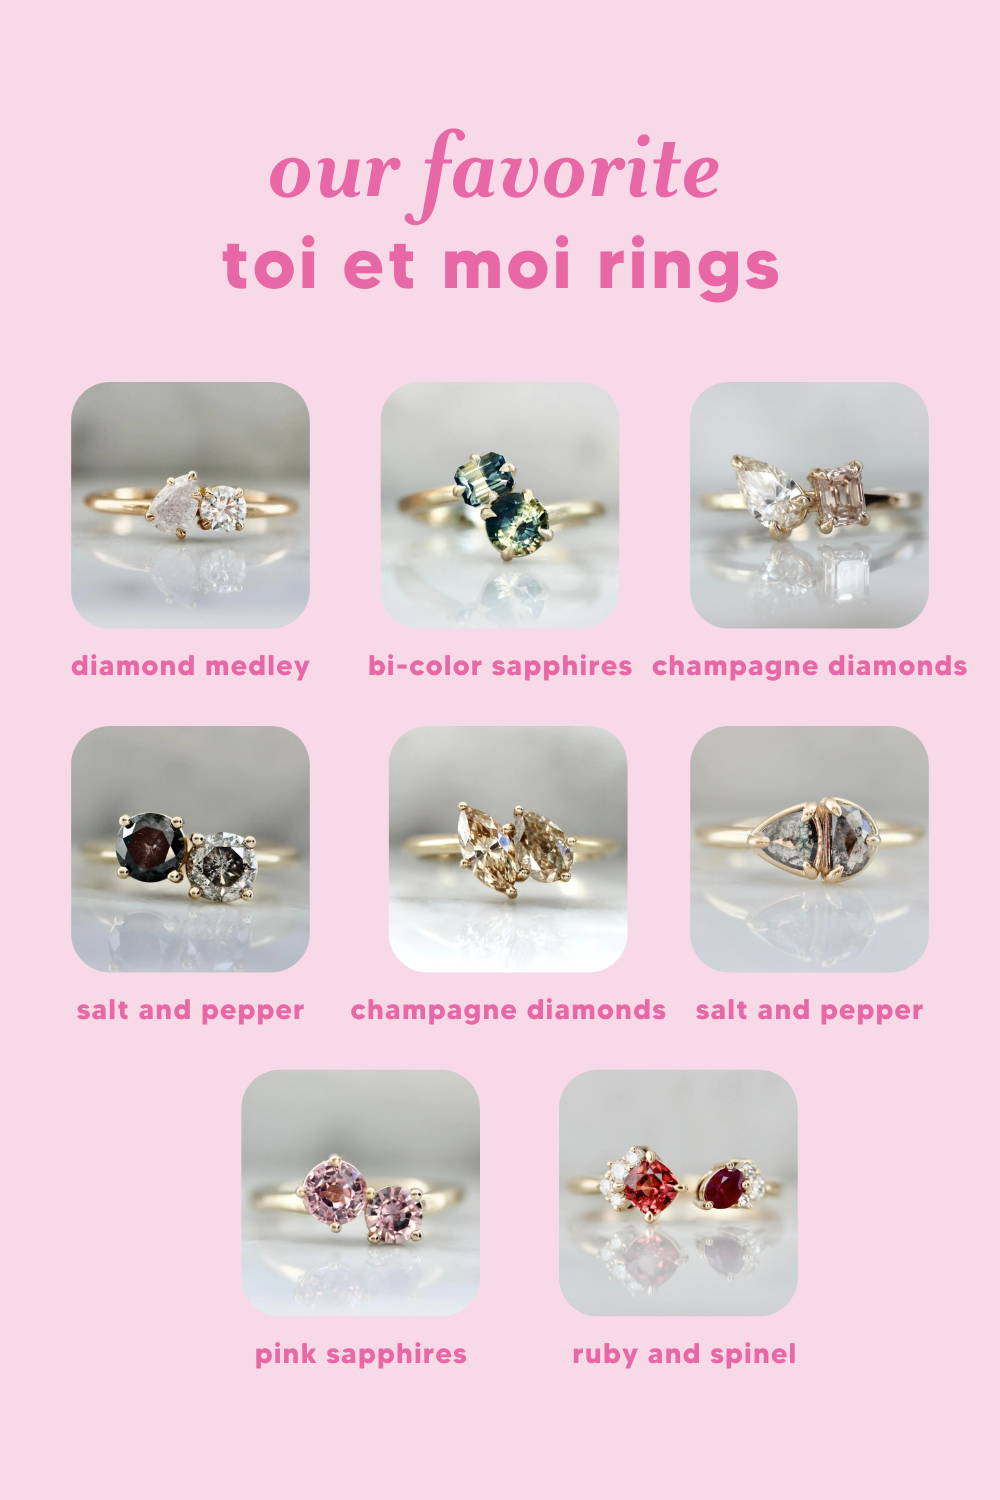 THE SUN AND MOON TOI ET MOI RING